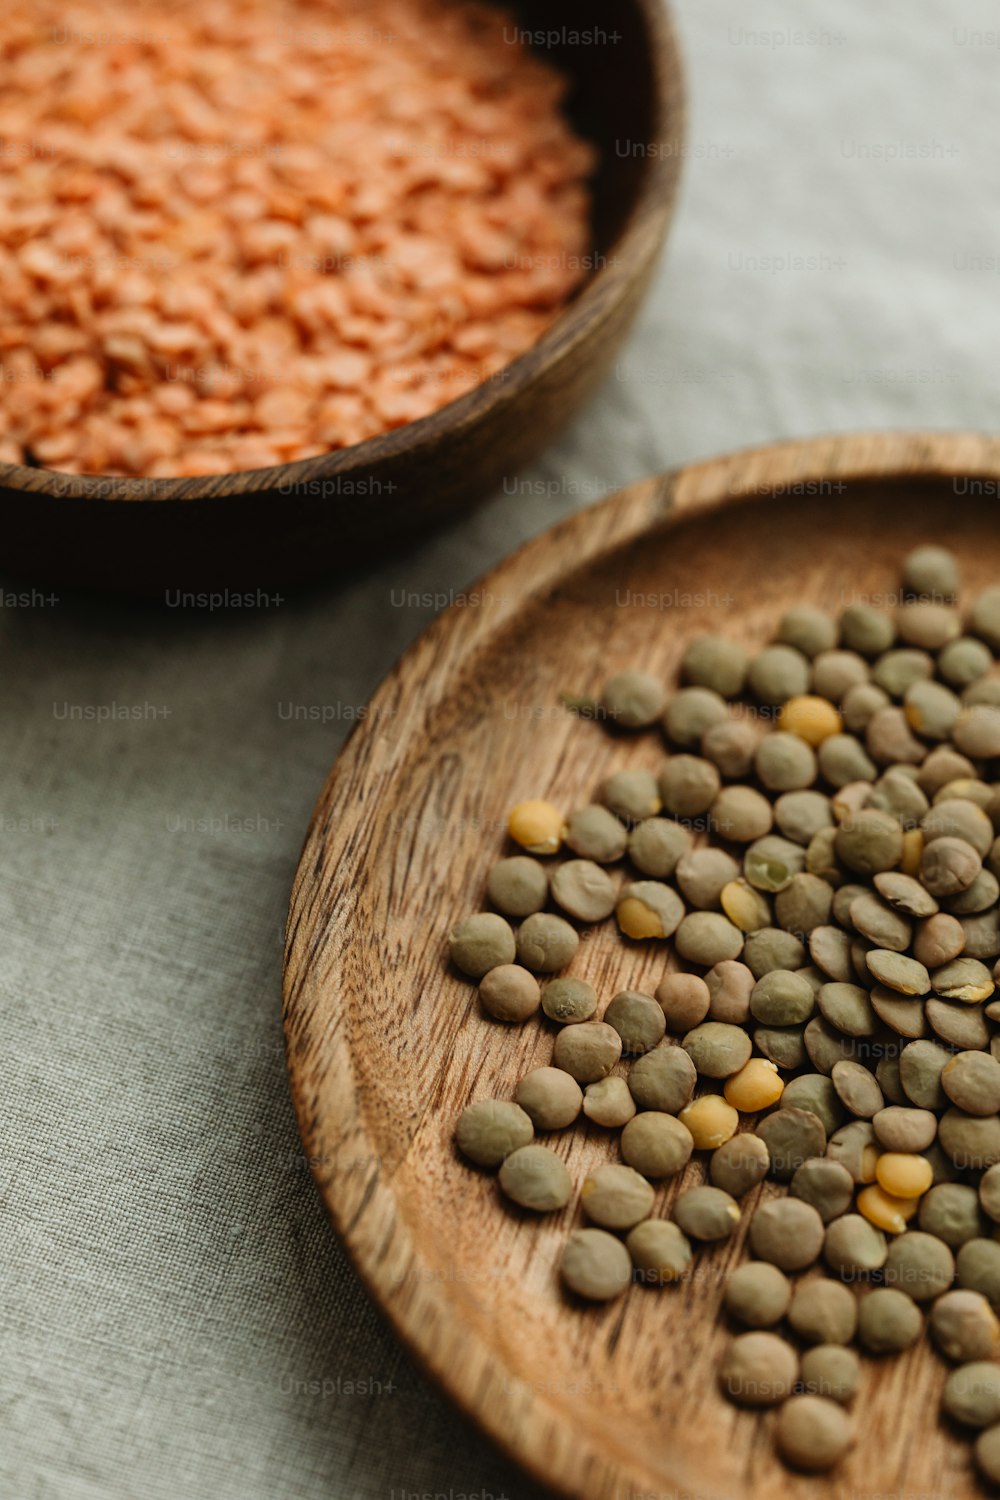 a wooden bowl filled with lentils next to a wooden bowl filled with lentils